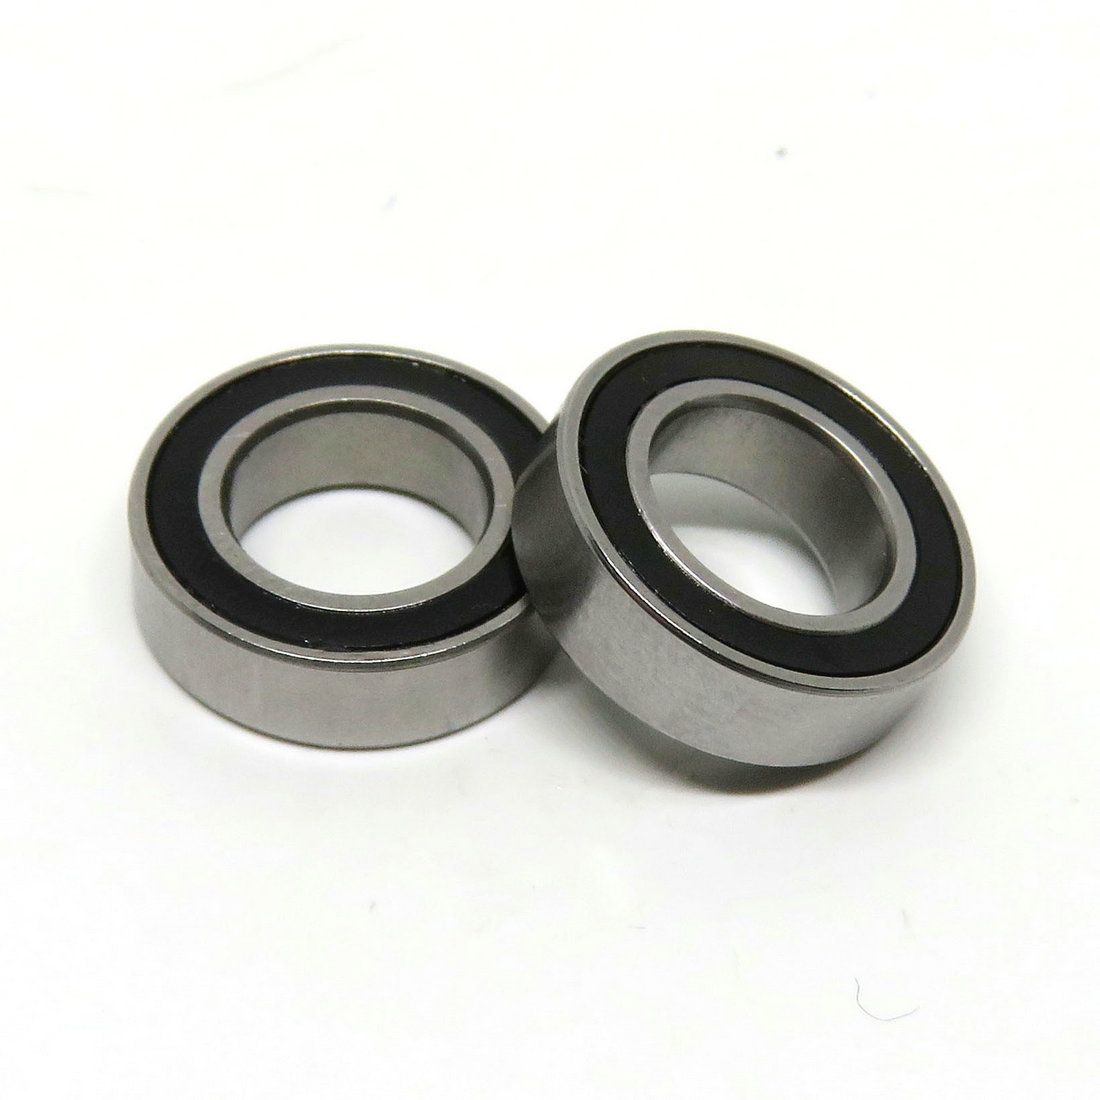 MR148RS Miniature ball bearing MR148-RS 8x14x4 MR148-2RS MR148 2RS MR148 RS